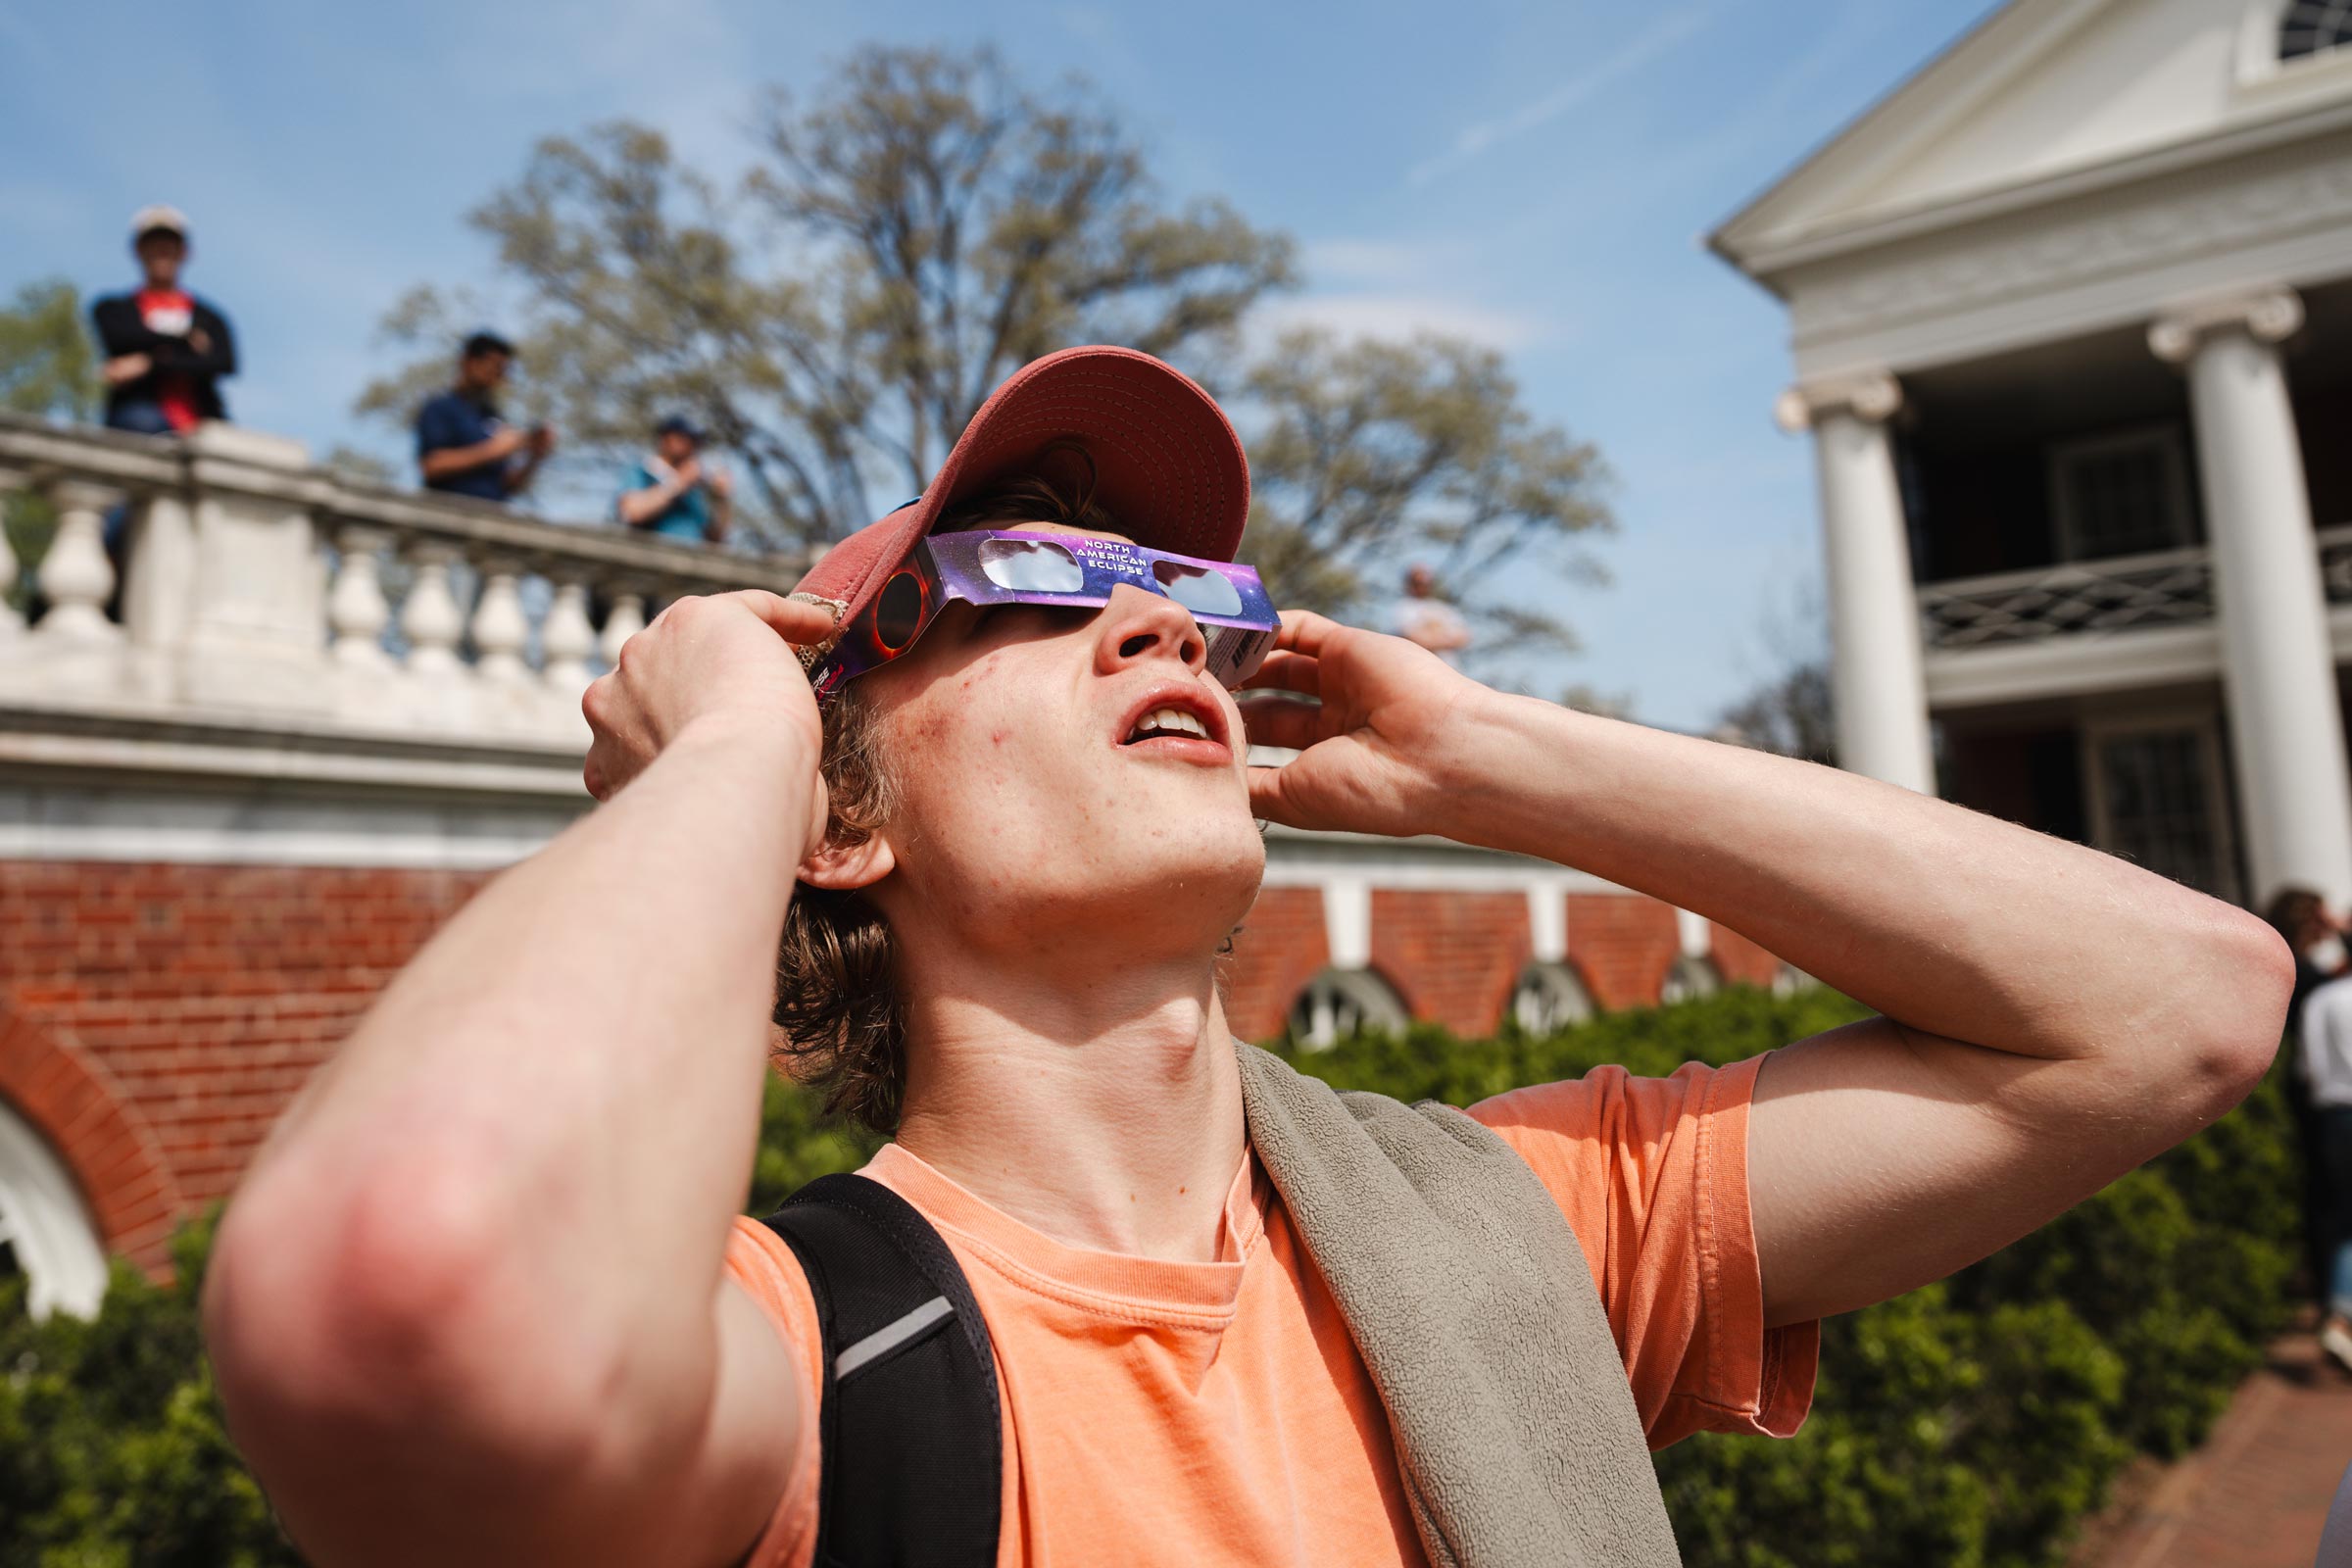 Guy gazes at solar eclipse with glasses